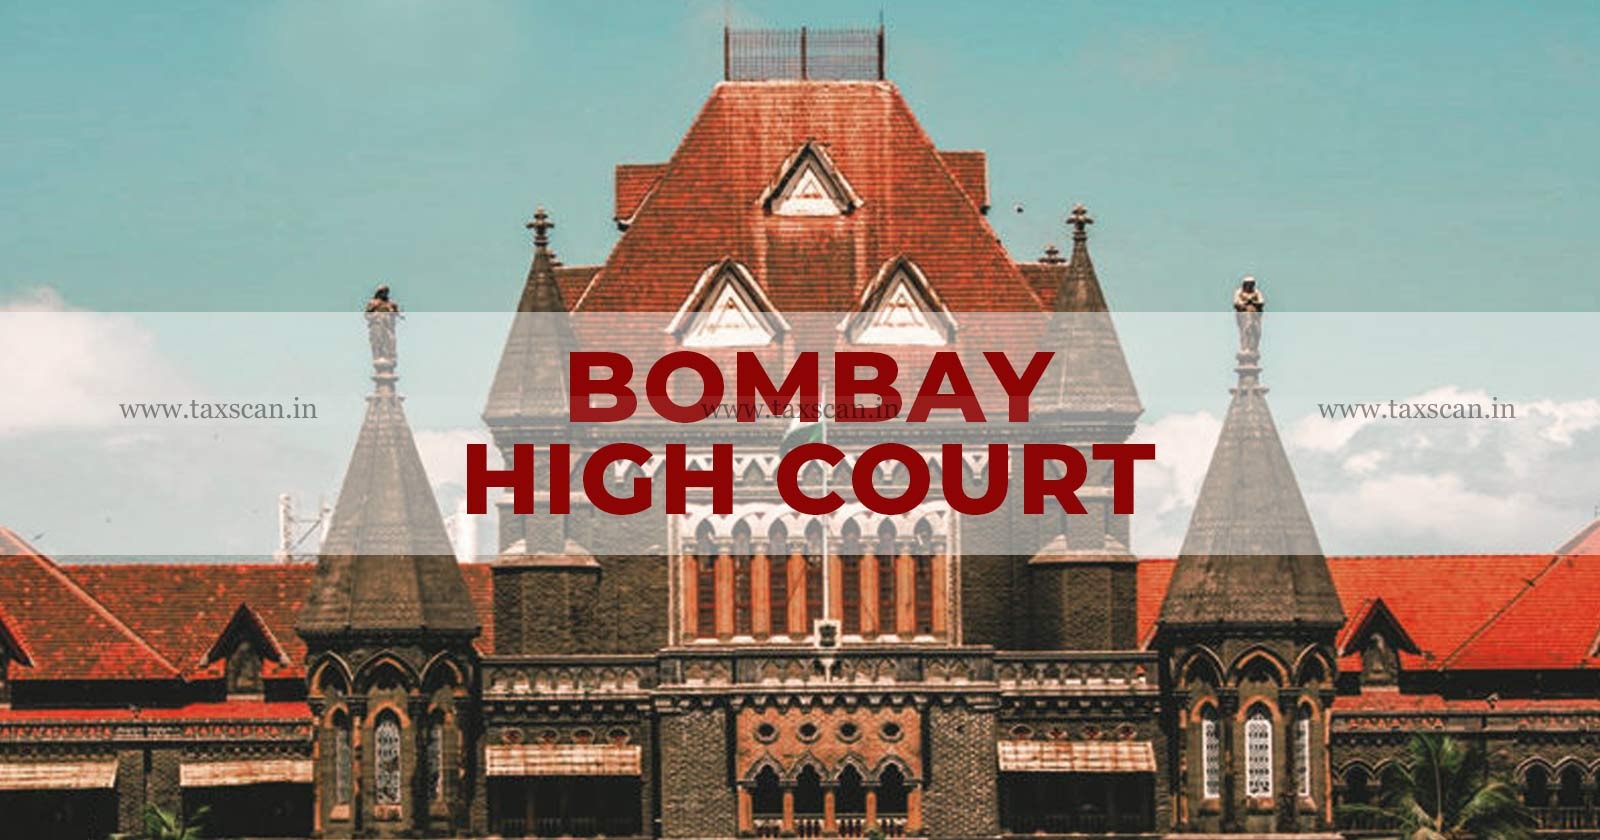 Bombay High Court - Show Cause Notice - Old Show Cause Notice Citing Inordinate Delay in Adjudicating Notice & Inability to Locate Case Records - taxscan